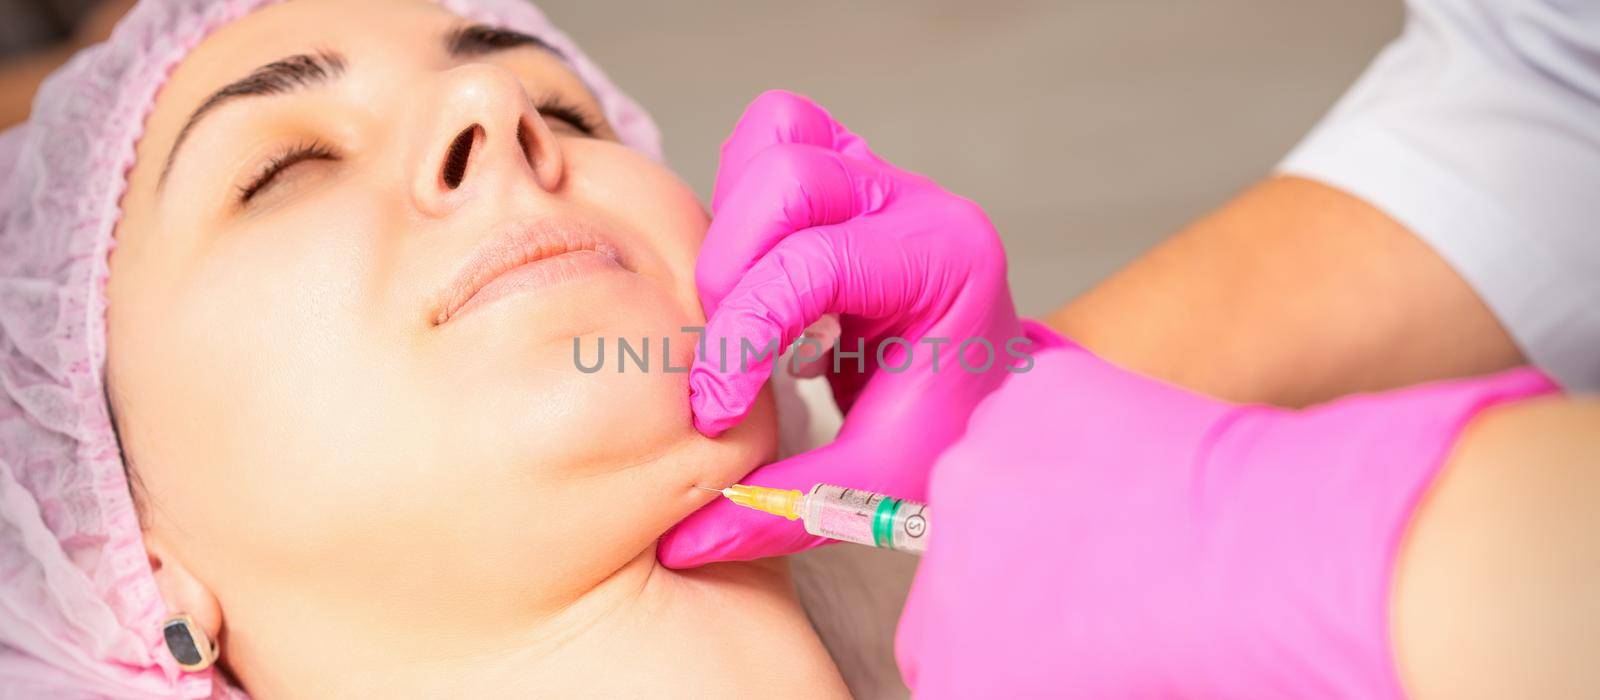 The cosmetologist makes lipolytic injection on the chin of a young woman against the double chin in a beauty salon. by okskukuruza